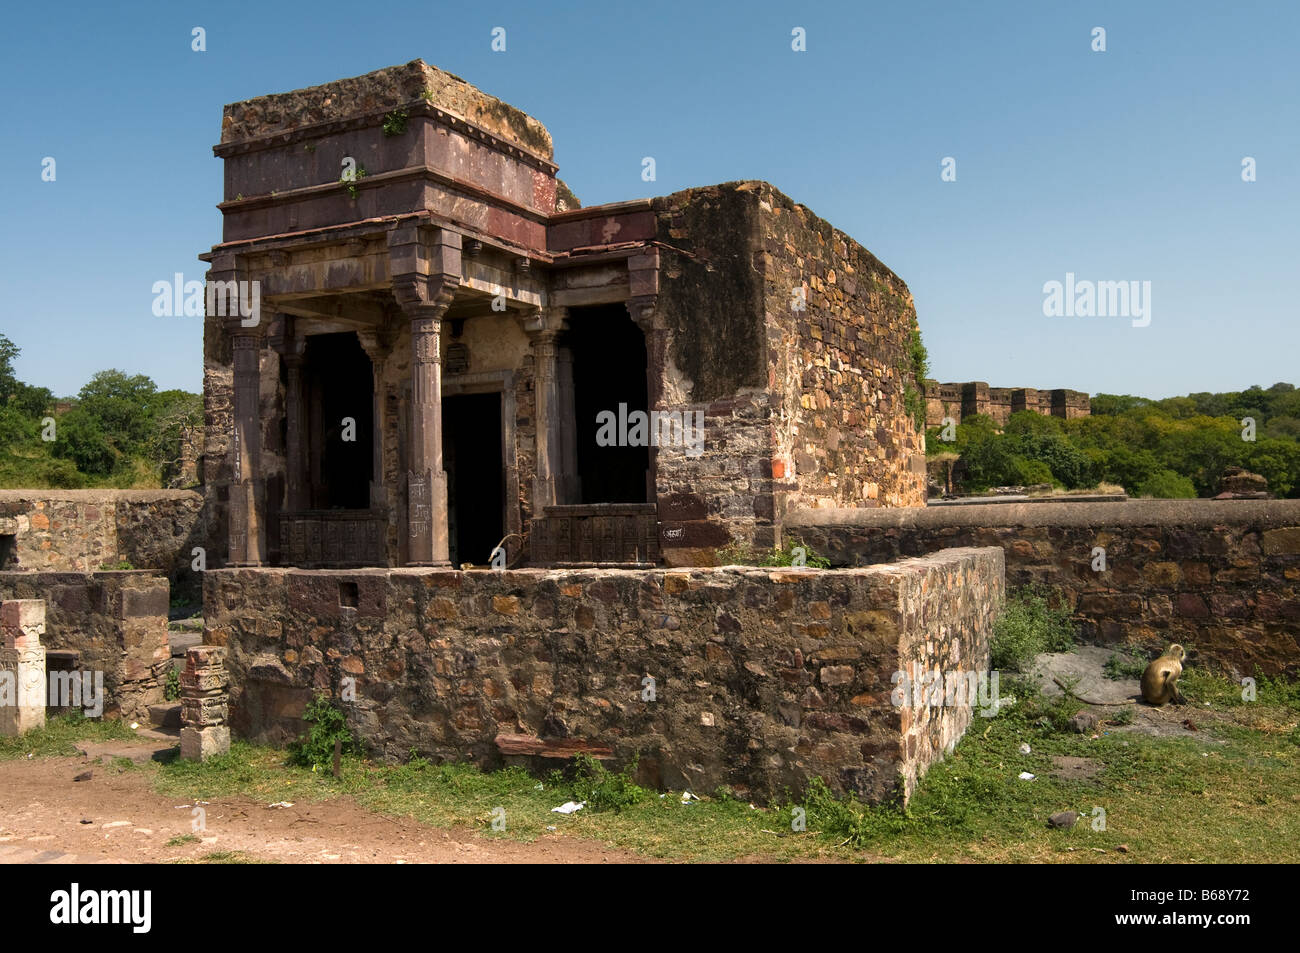 Ranthambore fort. Parco nazionale di Ranthambore. Il Rajasthan. India Foto Stock